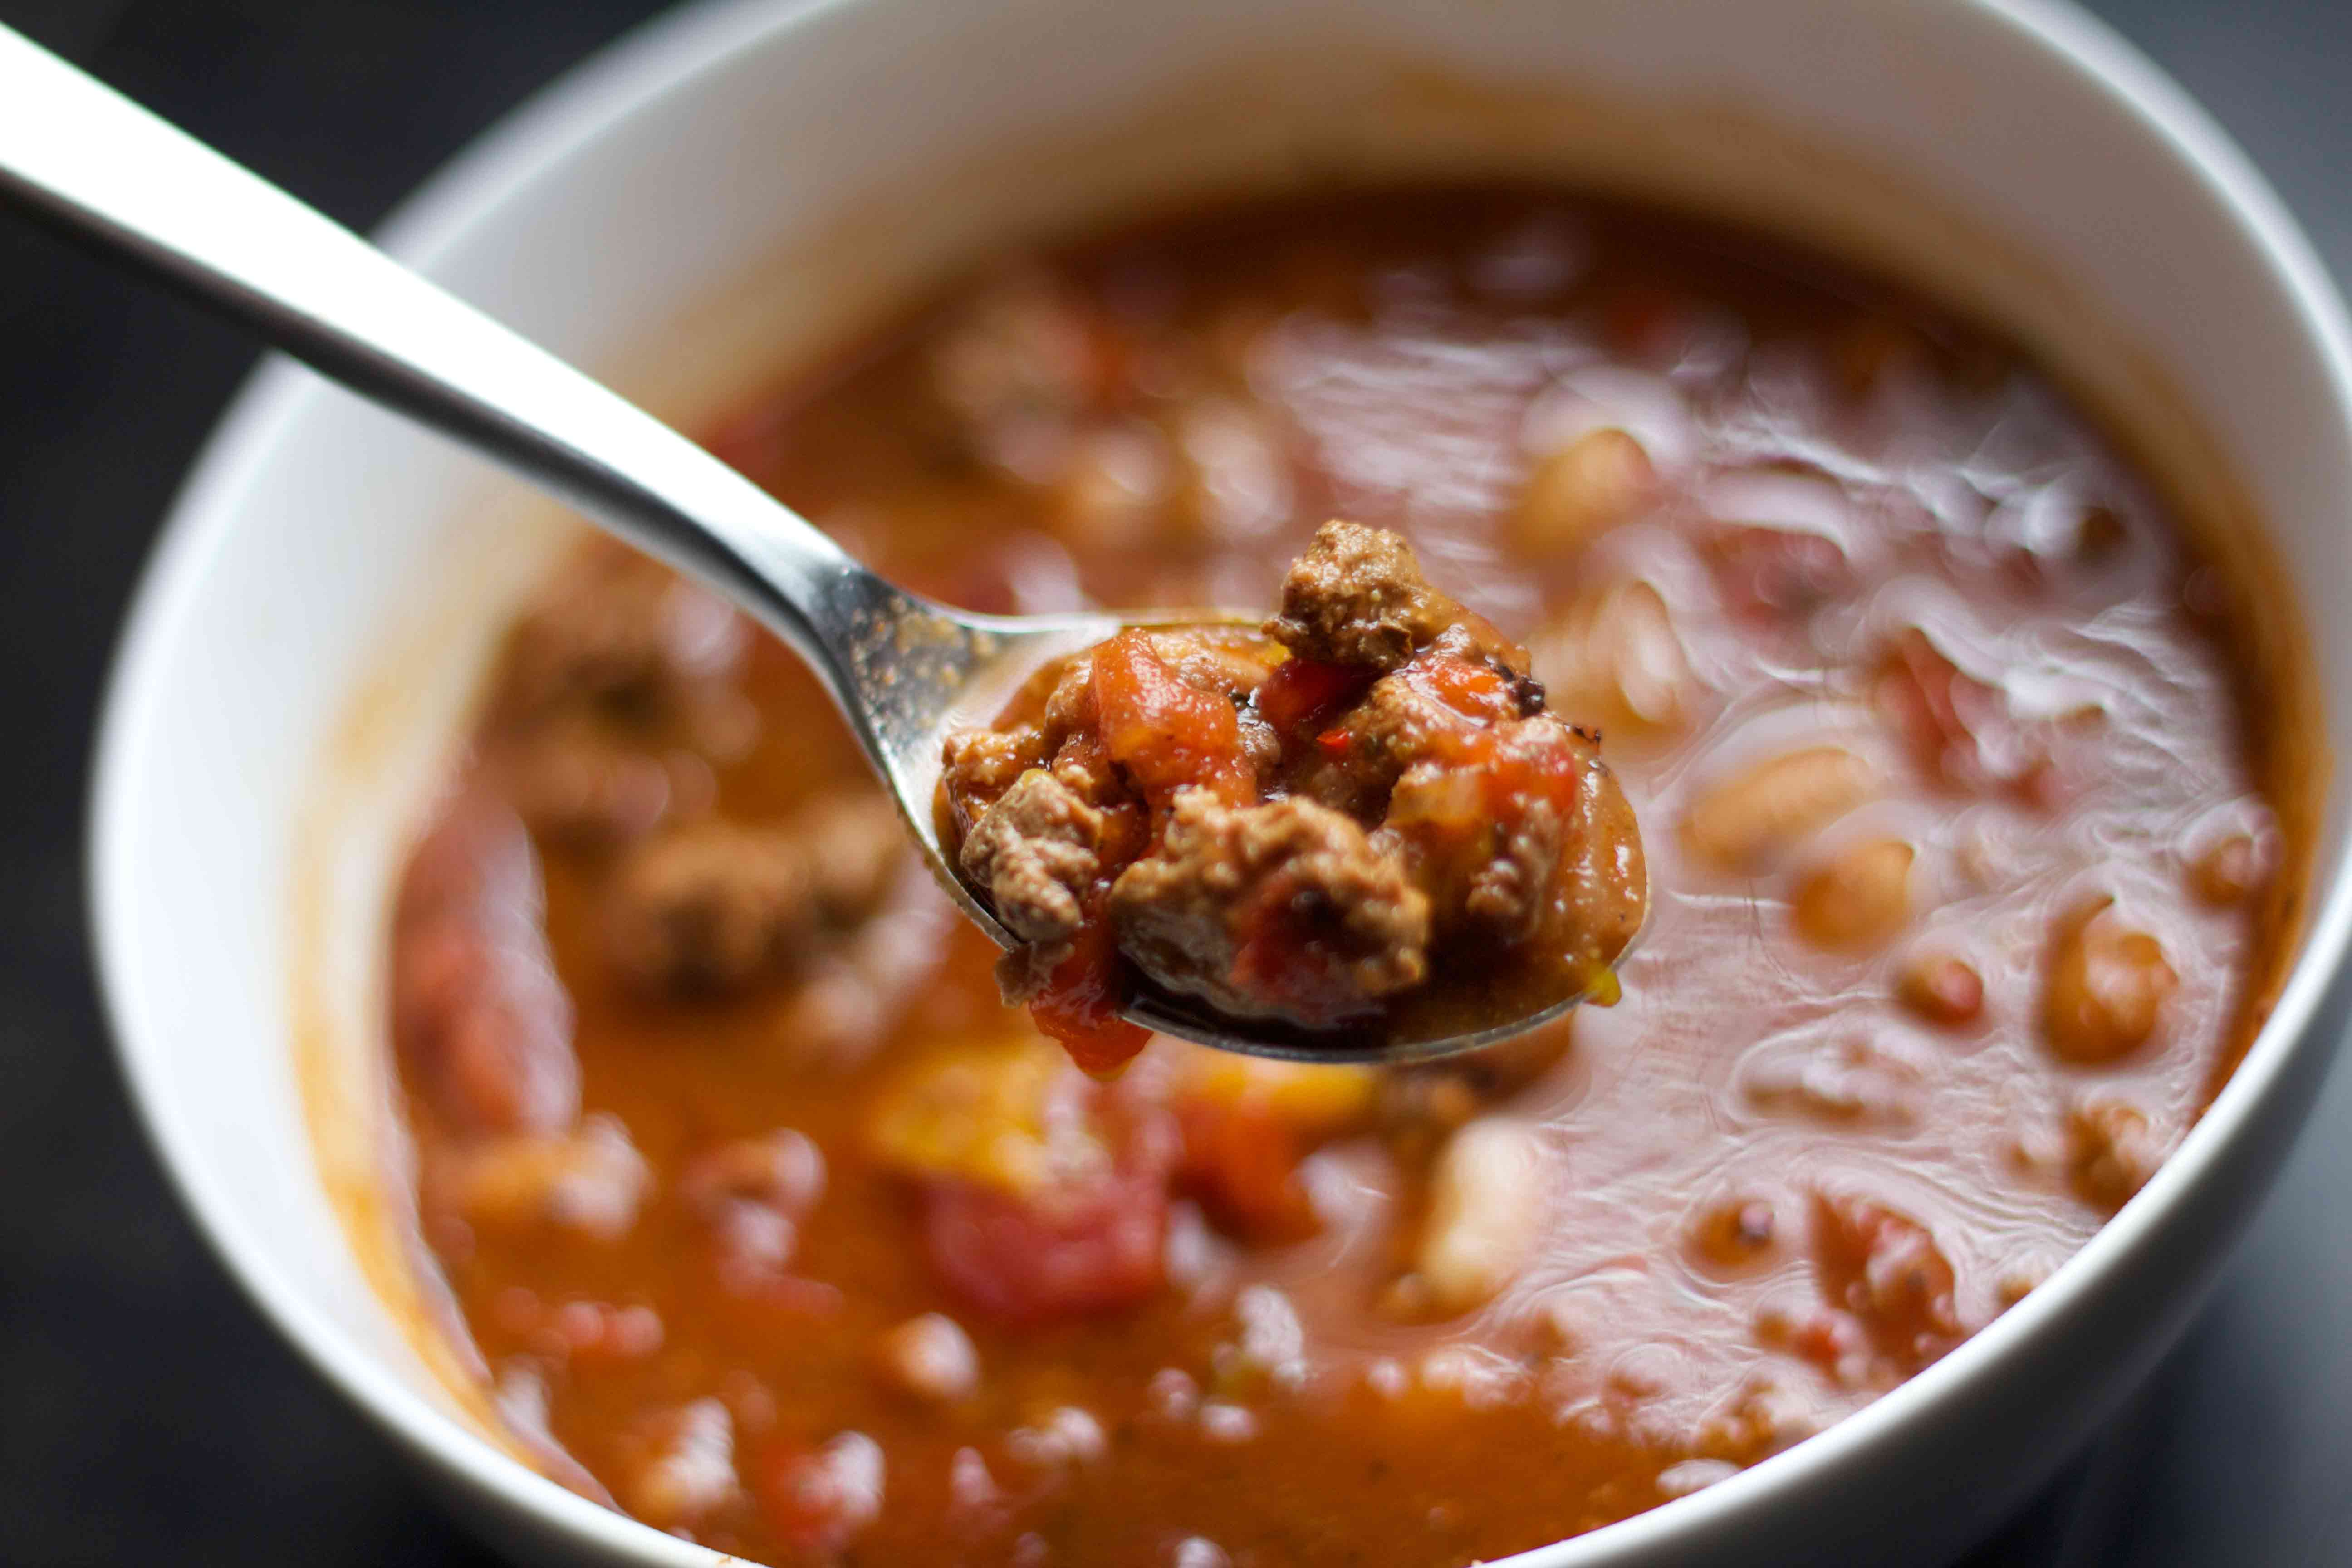 Barbecue Turkey Chili. Warm and hearty weight-loss surgery meal!